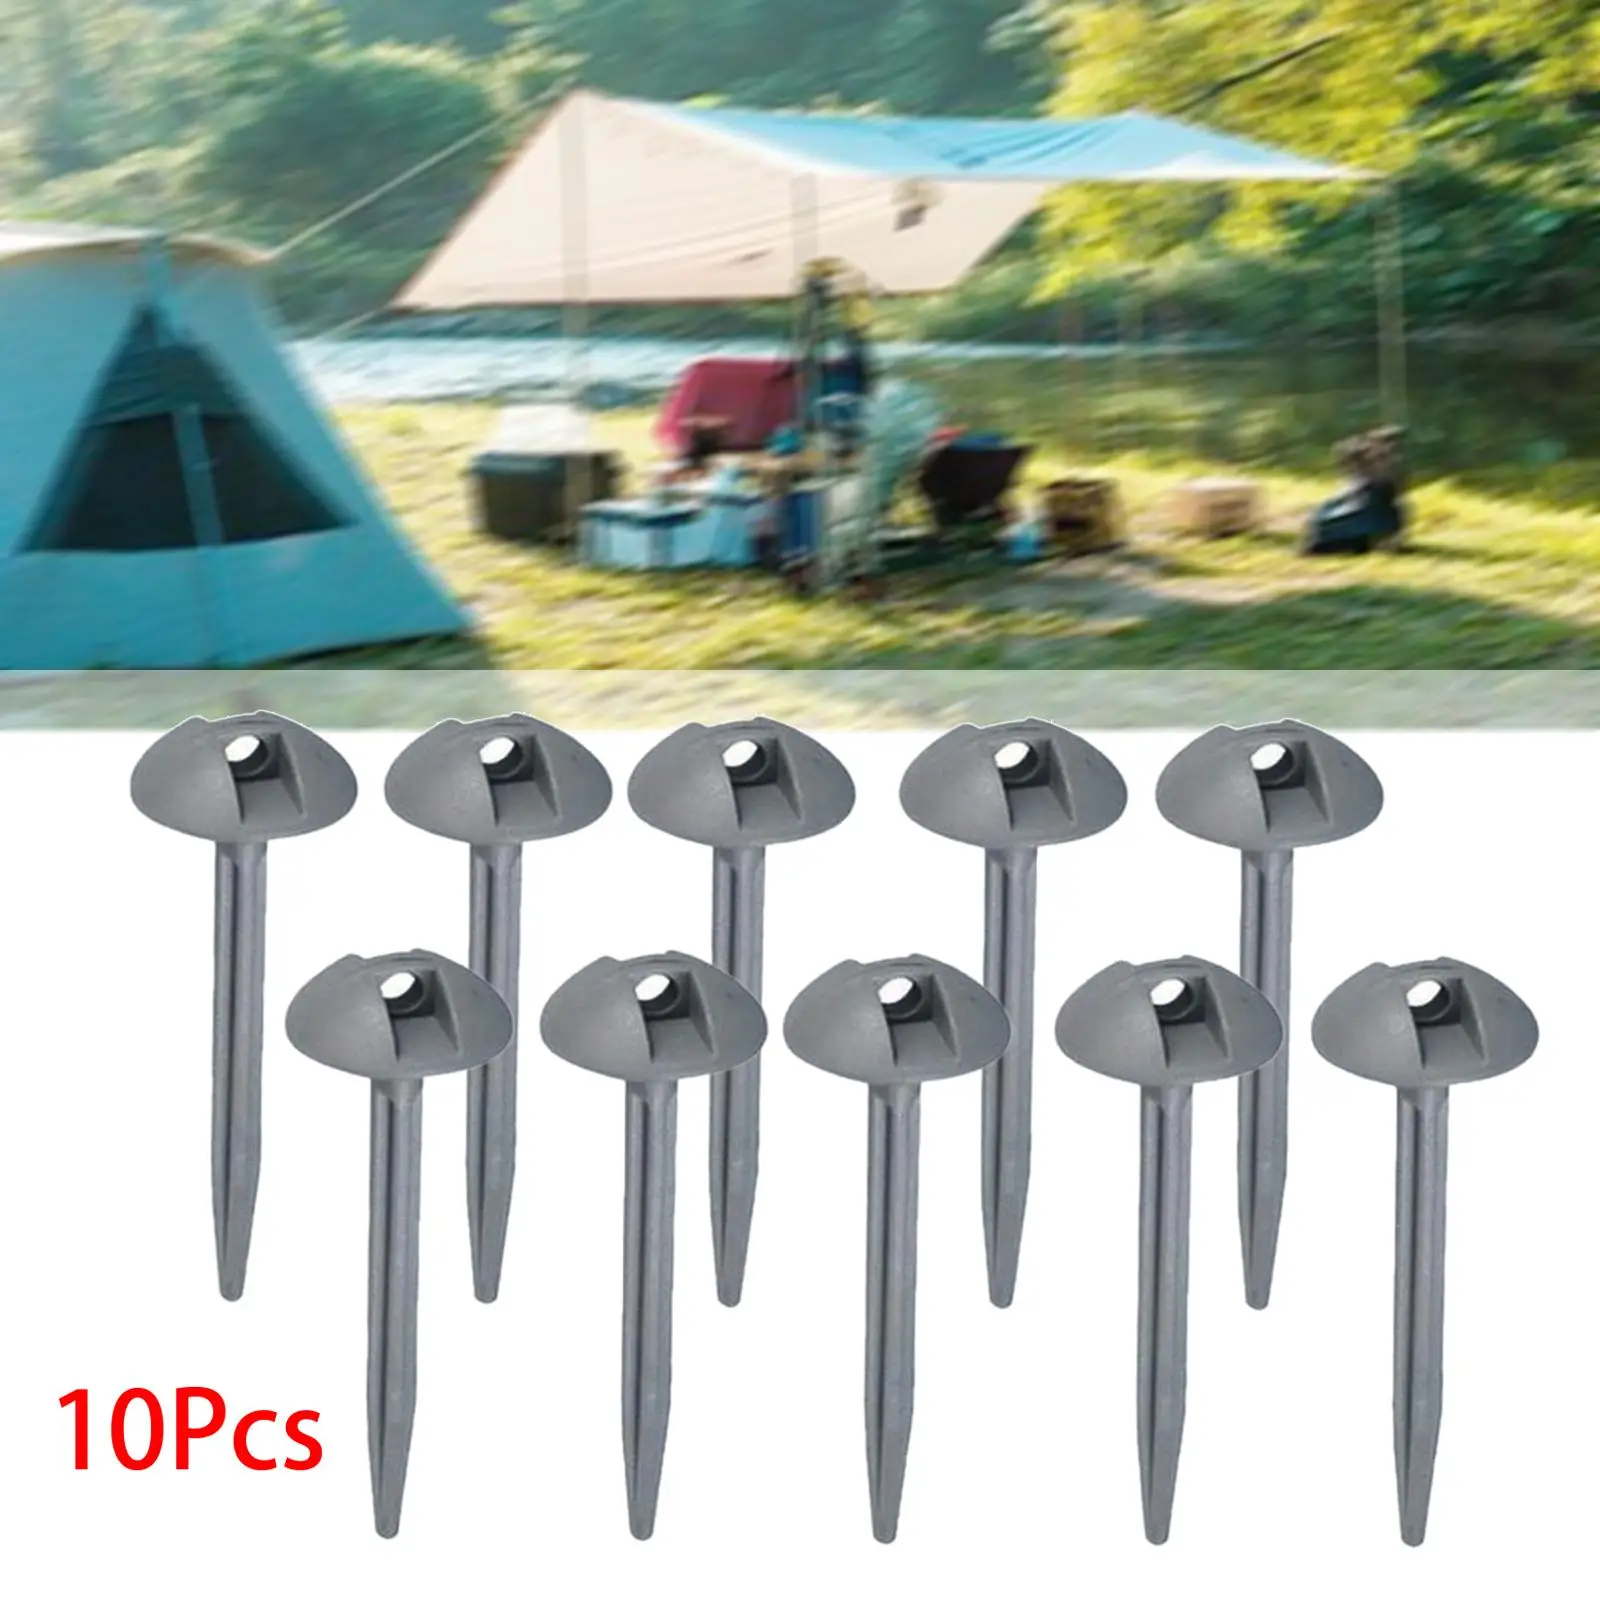 10 Pieces Tent Stakes Awning Shelter Durable Canopy Stakes Tarp Tent Pegs Portable for Beach Backyard Outdoor Tent Backpacking